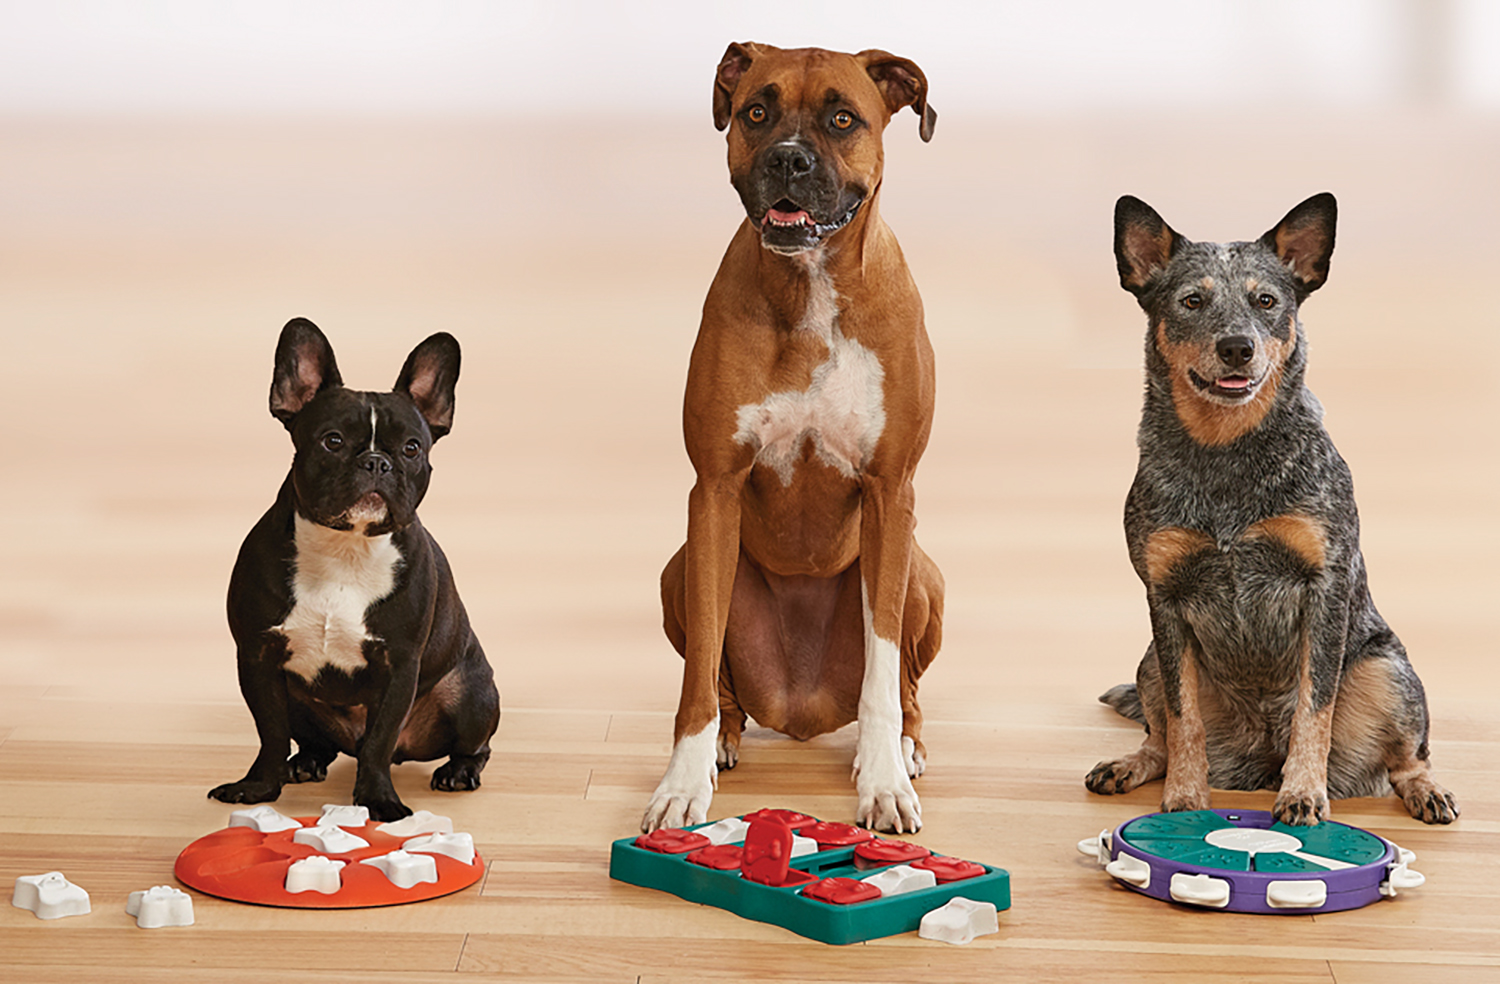 Product and branding dog puzzles, photography, studio